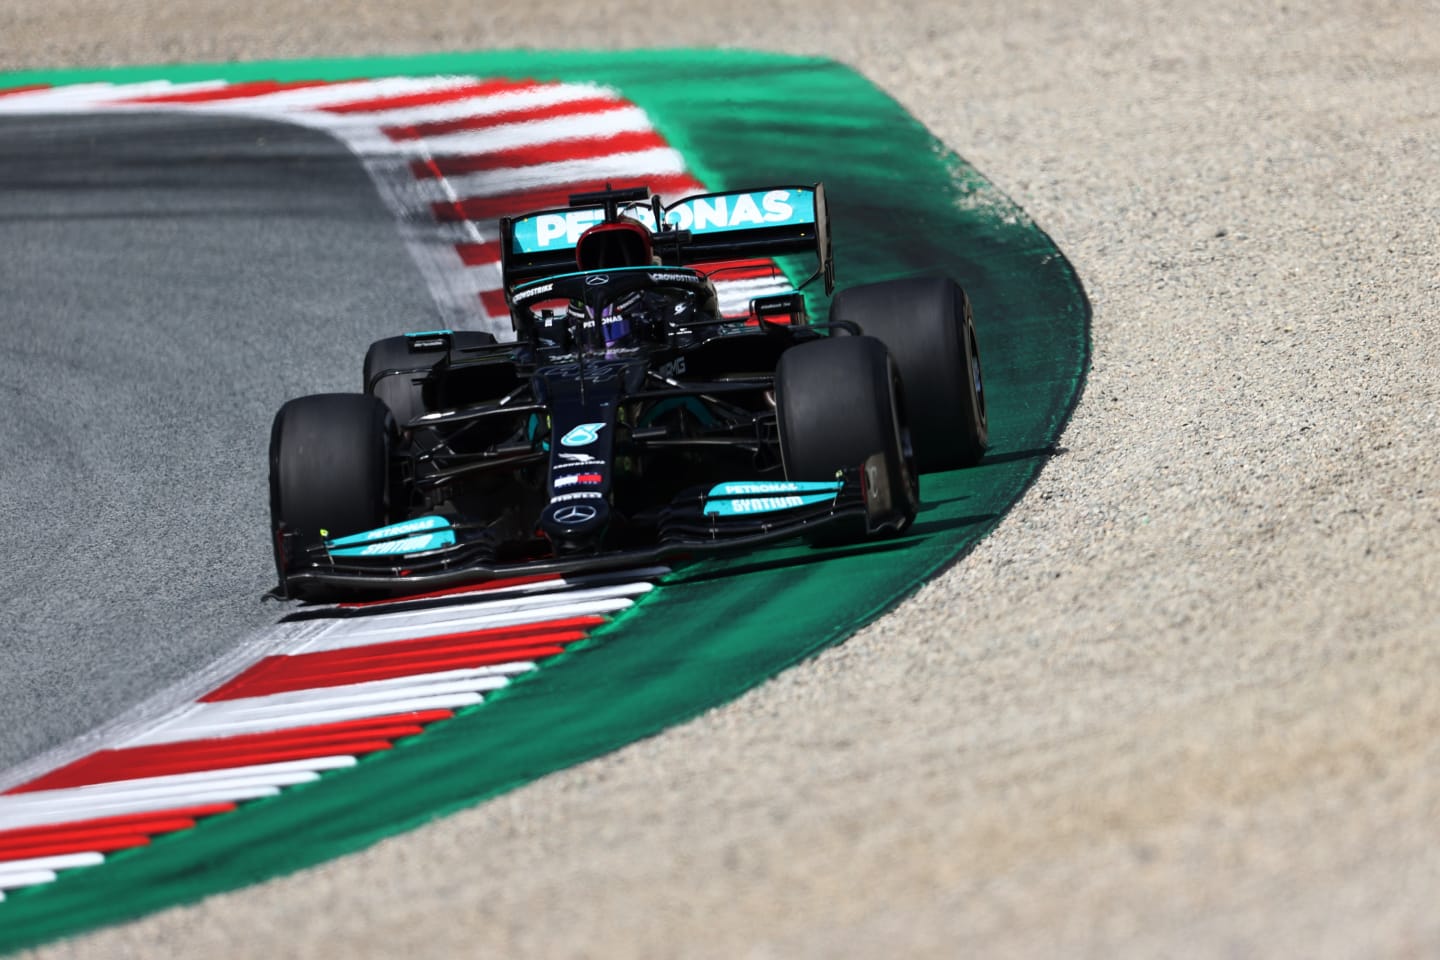 SPIELBERG, AUSTRIA - JUNE 27: Lewis Hamilton of Great Britain driving the (44) Mercedes AMG Petronas F1 Team Mercedes W12 during the F1 Grand Prix of Styria at Red Bull Ring on June 27, 2021 in Spielberg, Austria. (Photo by Clive Rose/Getty Images)